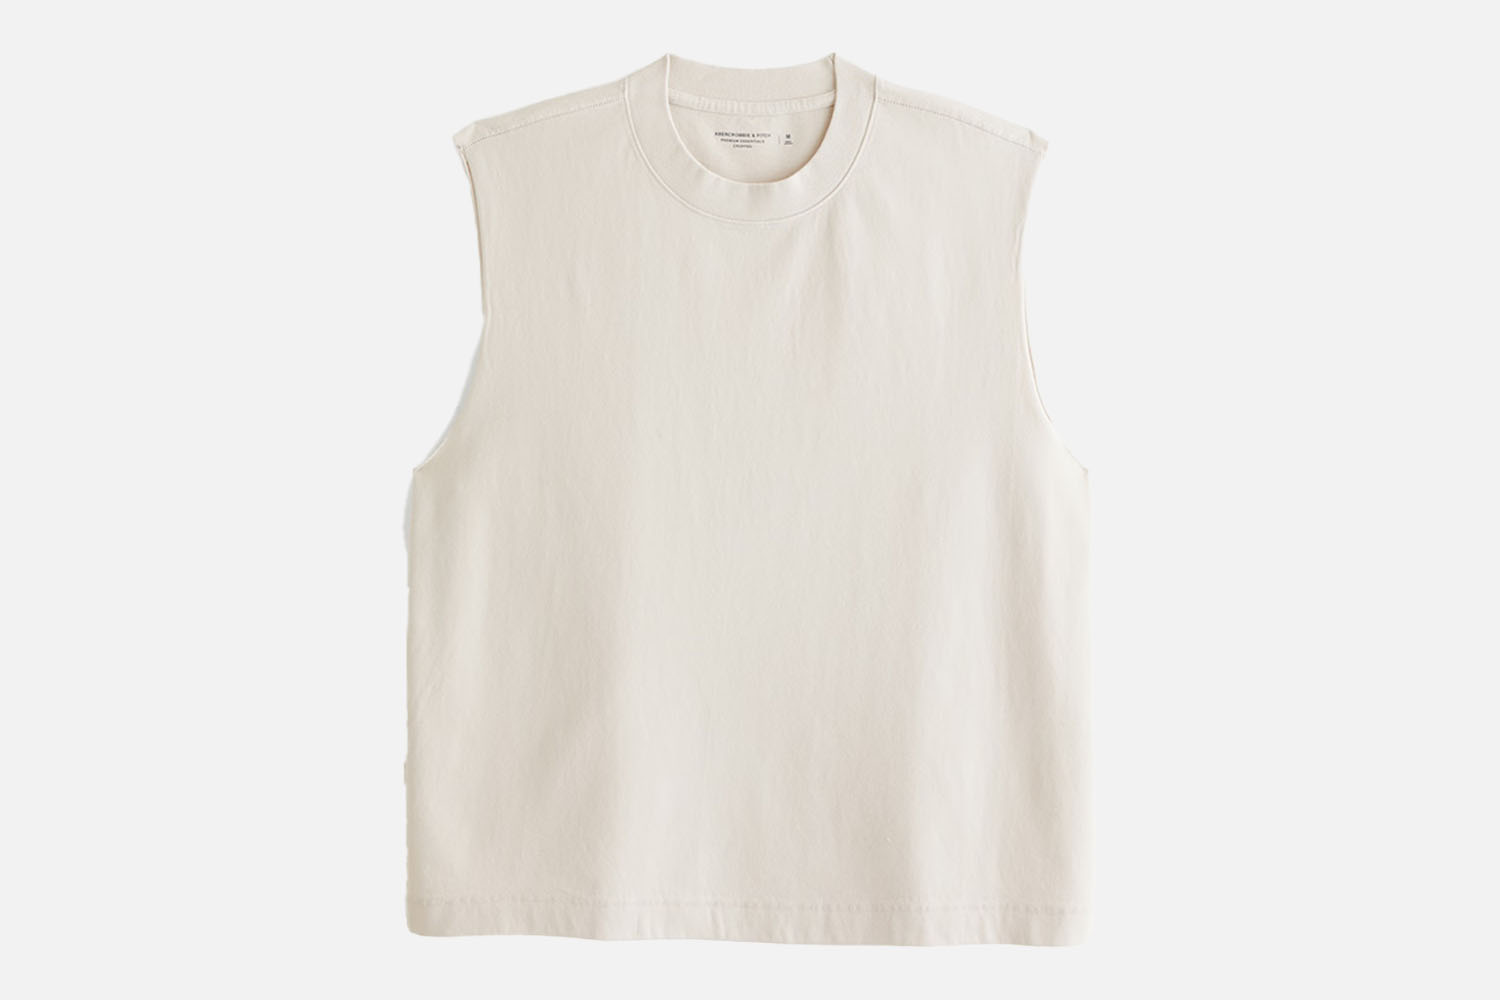 Abercrombie & Fitch Premium Heavyweight Cropped Tank